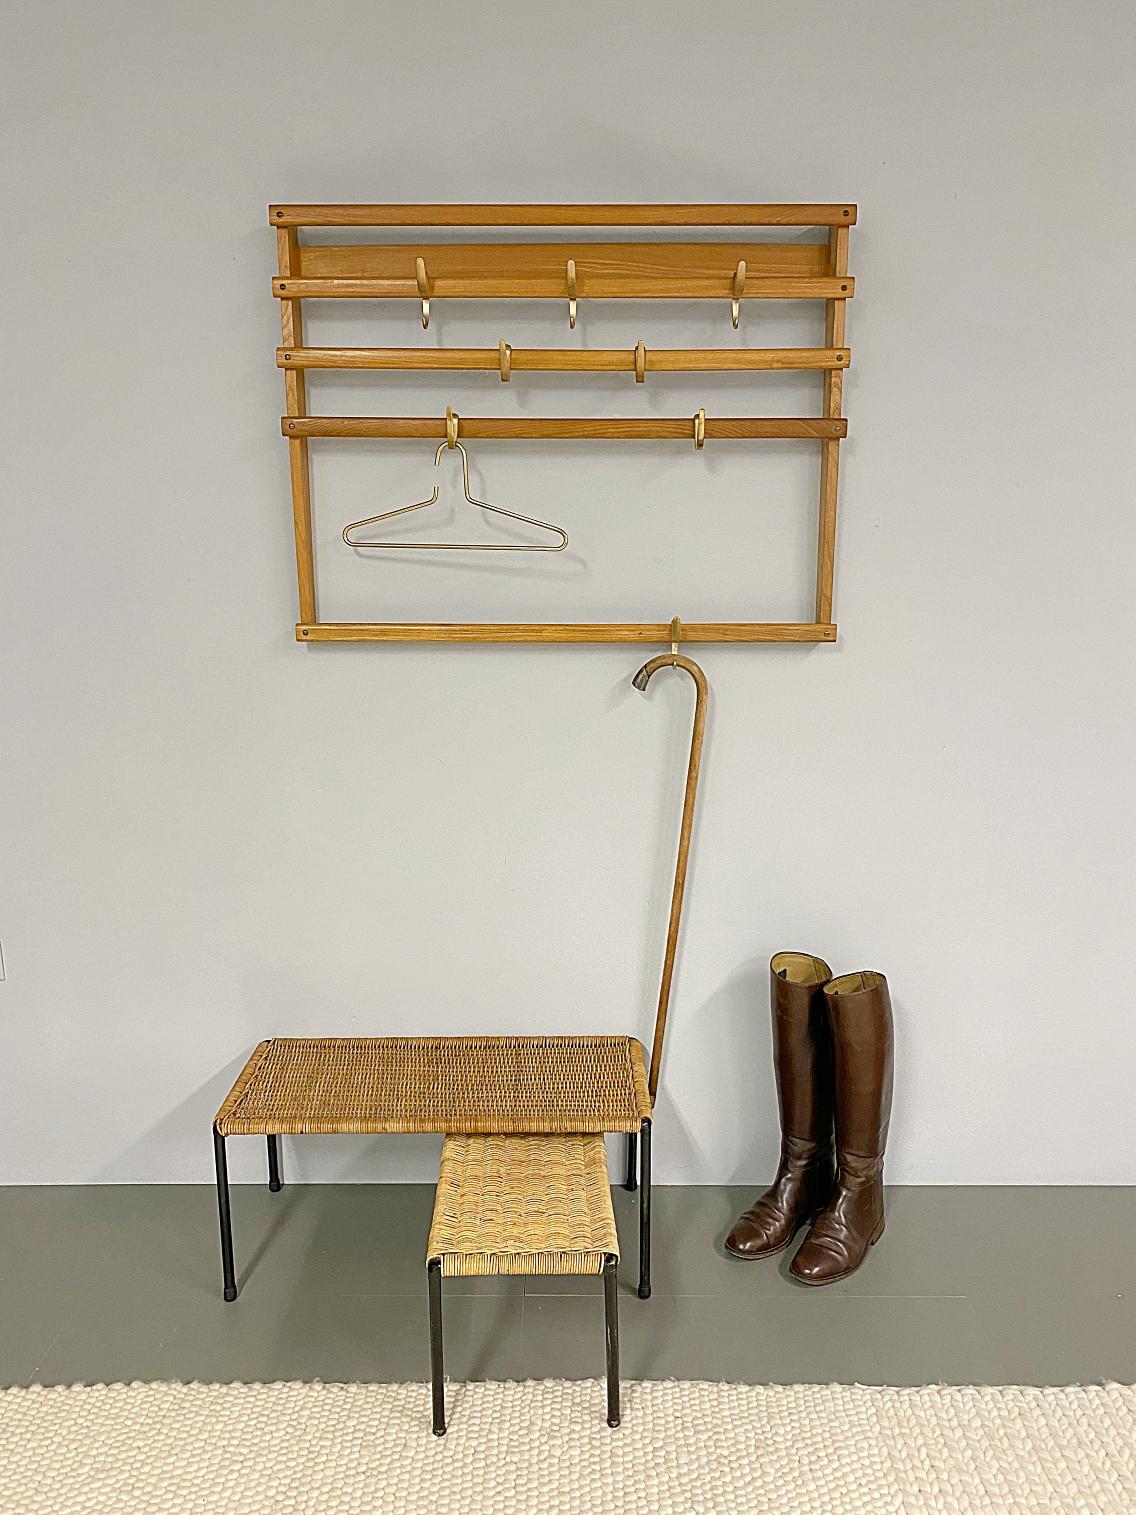 Austrian Mid-Century Modern coatrack #4547 made of solid waxed oak wood with eight polished solid brass hooks designed by Carl Auböck and handmade by Werkstätten Auböck.
Lit.: Carl Auböck the Workshop by Clemens Kois.

We ship with DHL Express.

  